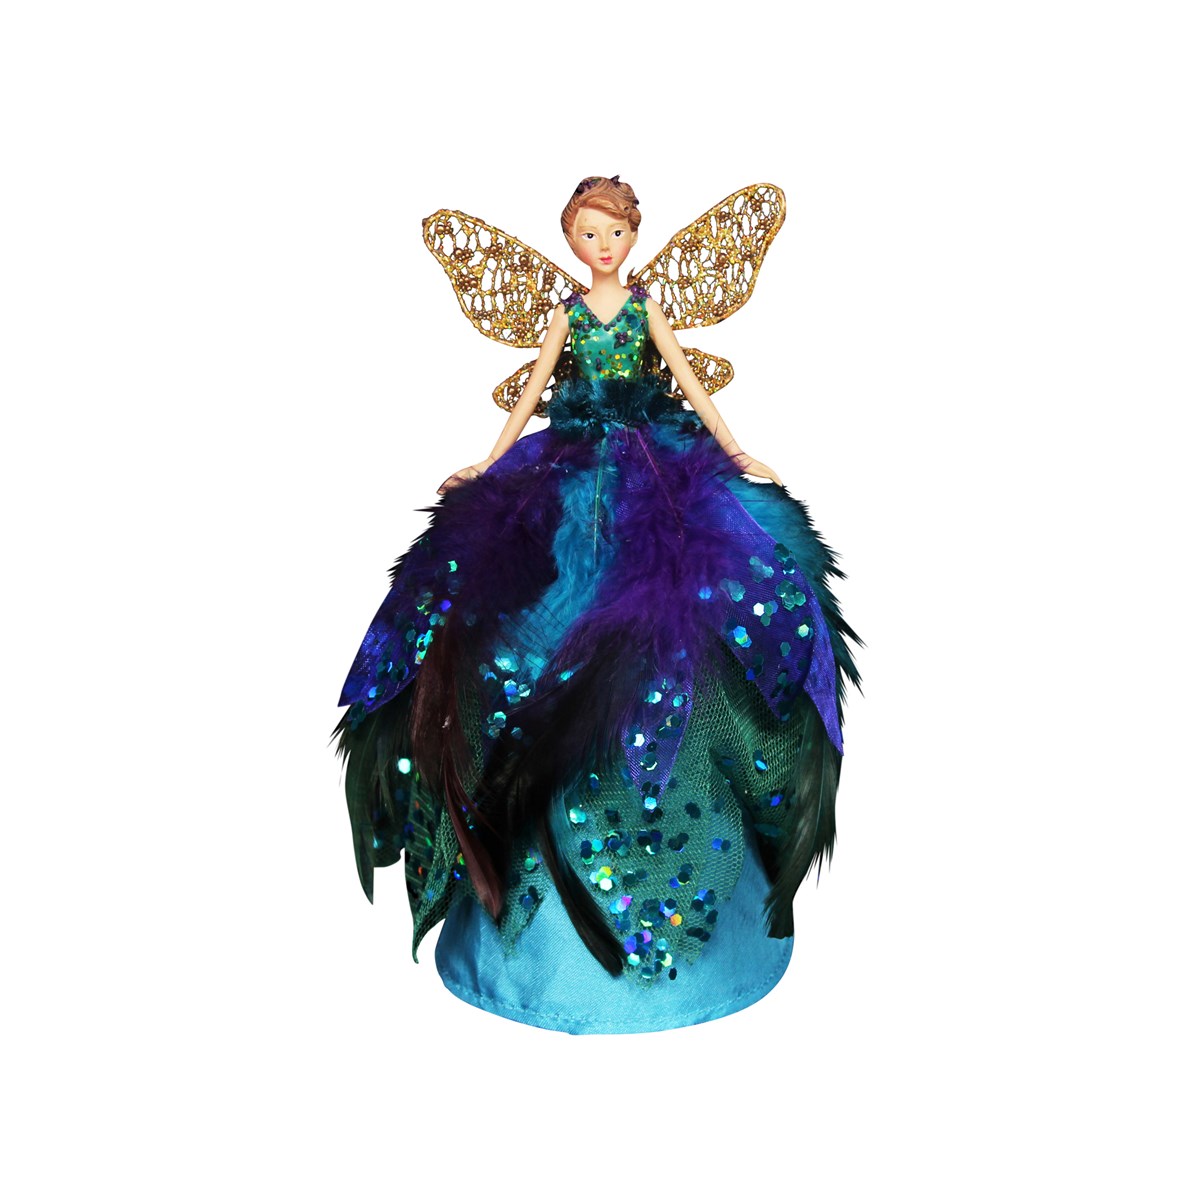 Resin and sheer peacock feather Christmas fairy tree topper. By Gisela Graham. The perfect festive addition to your home.